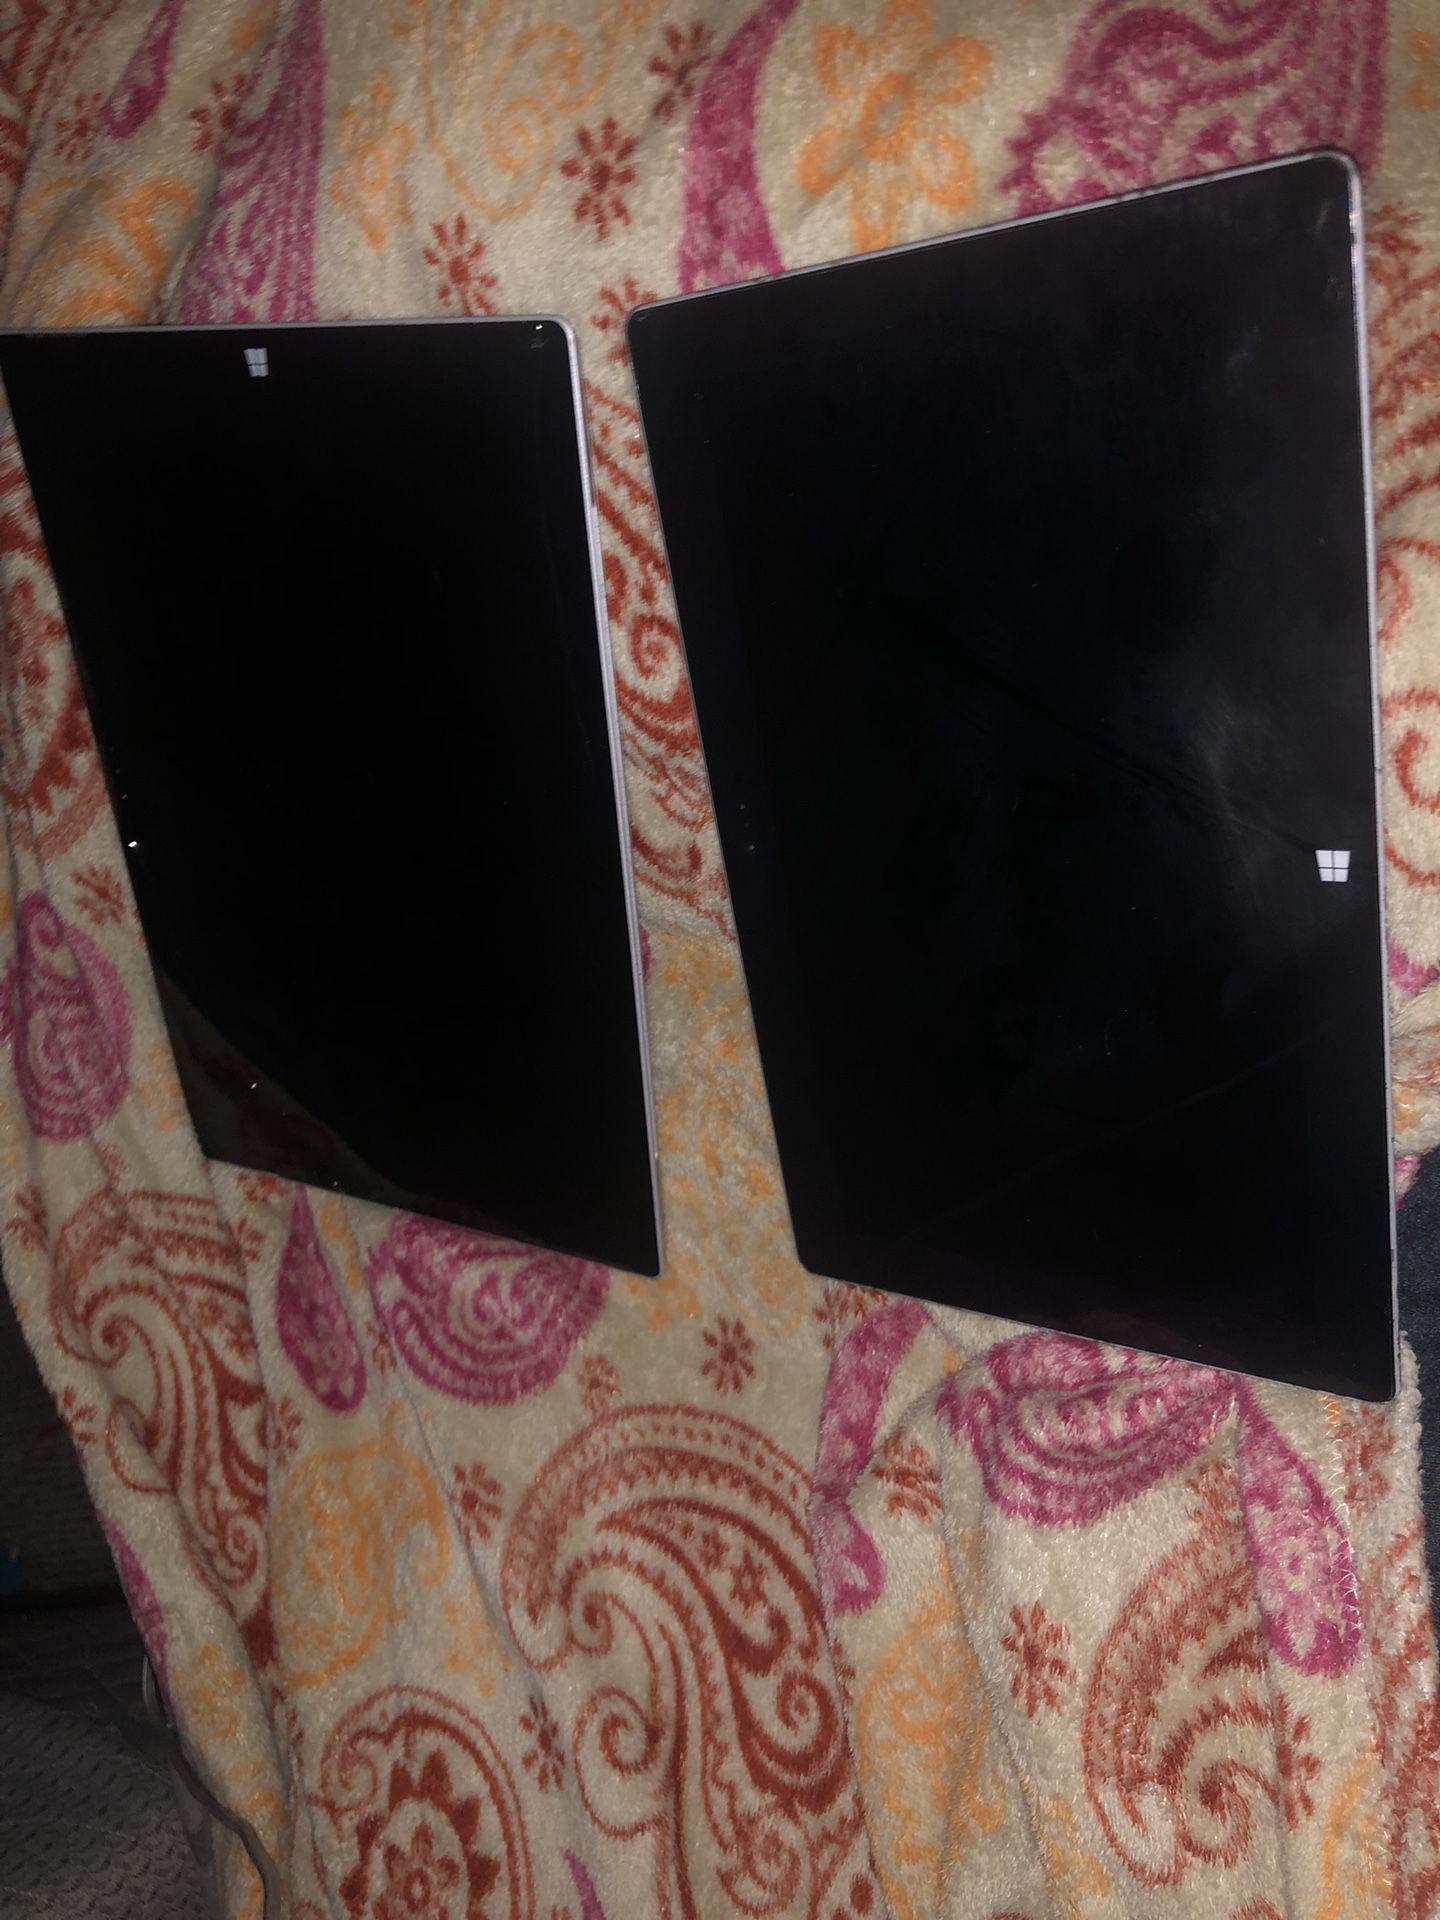 Windows Surface 3 and Surface RT For Parts